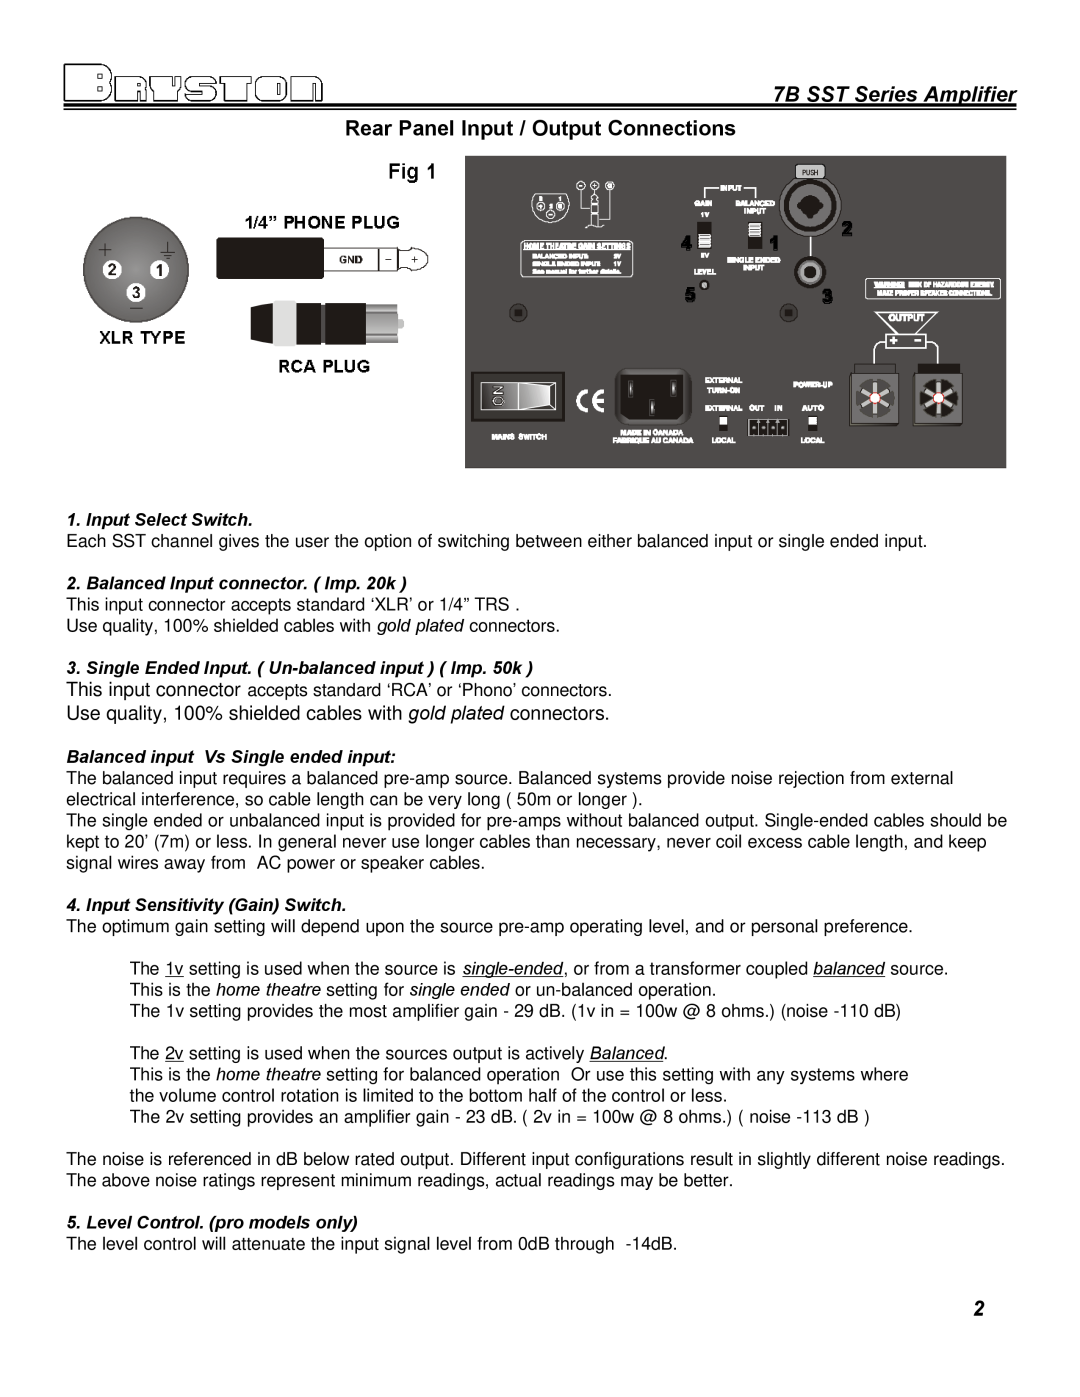 Bryston owner manual Rear Panel Input / Output Connections, 7B SST Series Amplifier, Input Select Switch 